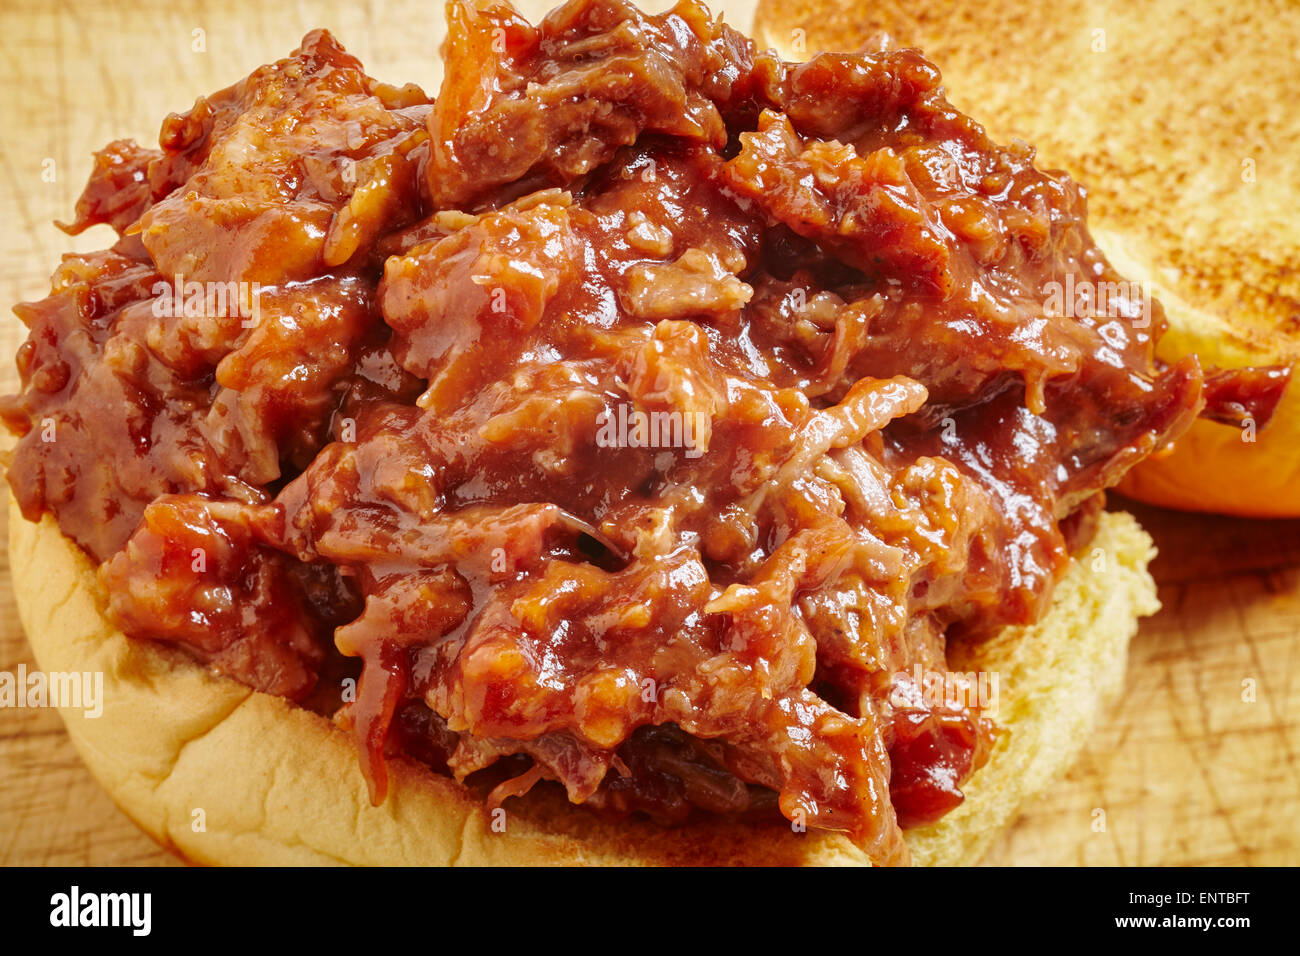 Pulled pork, a tradition food from the southern United States. It's Served here on a burger bun, a common way to eat it today. Stock Photo